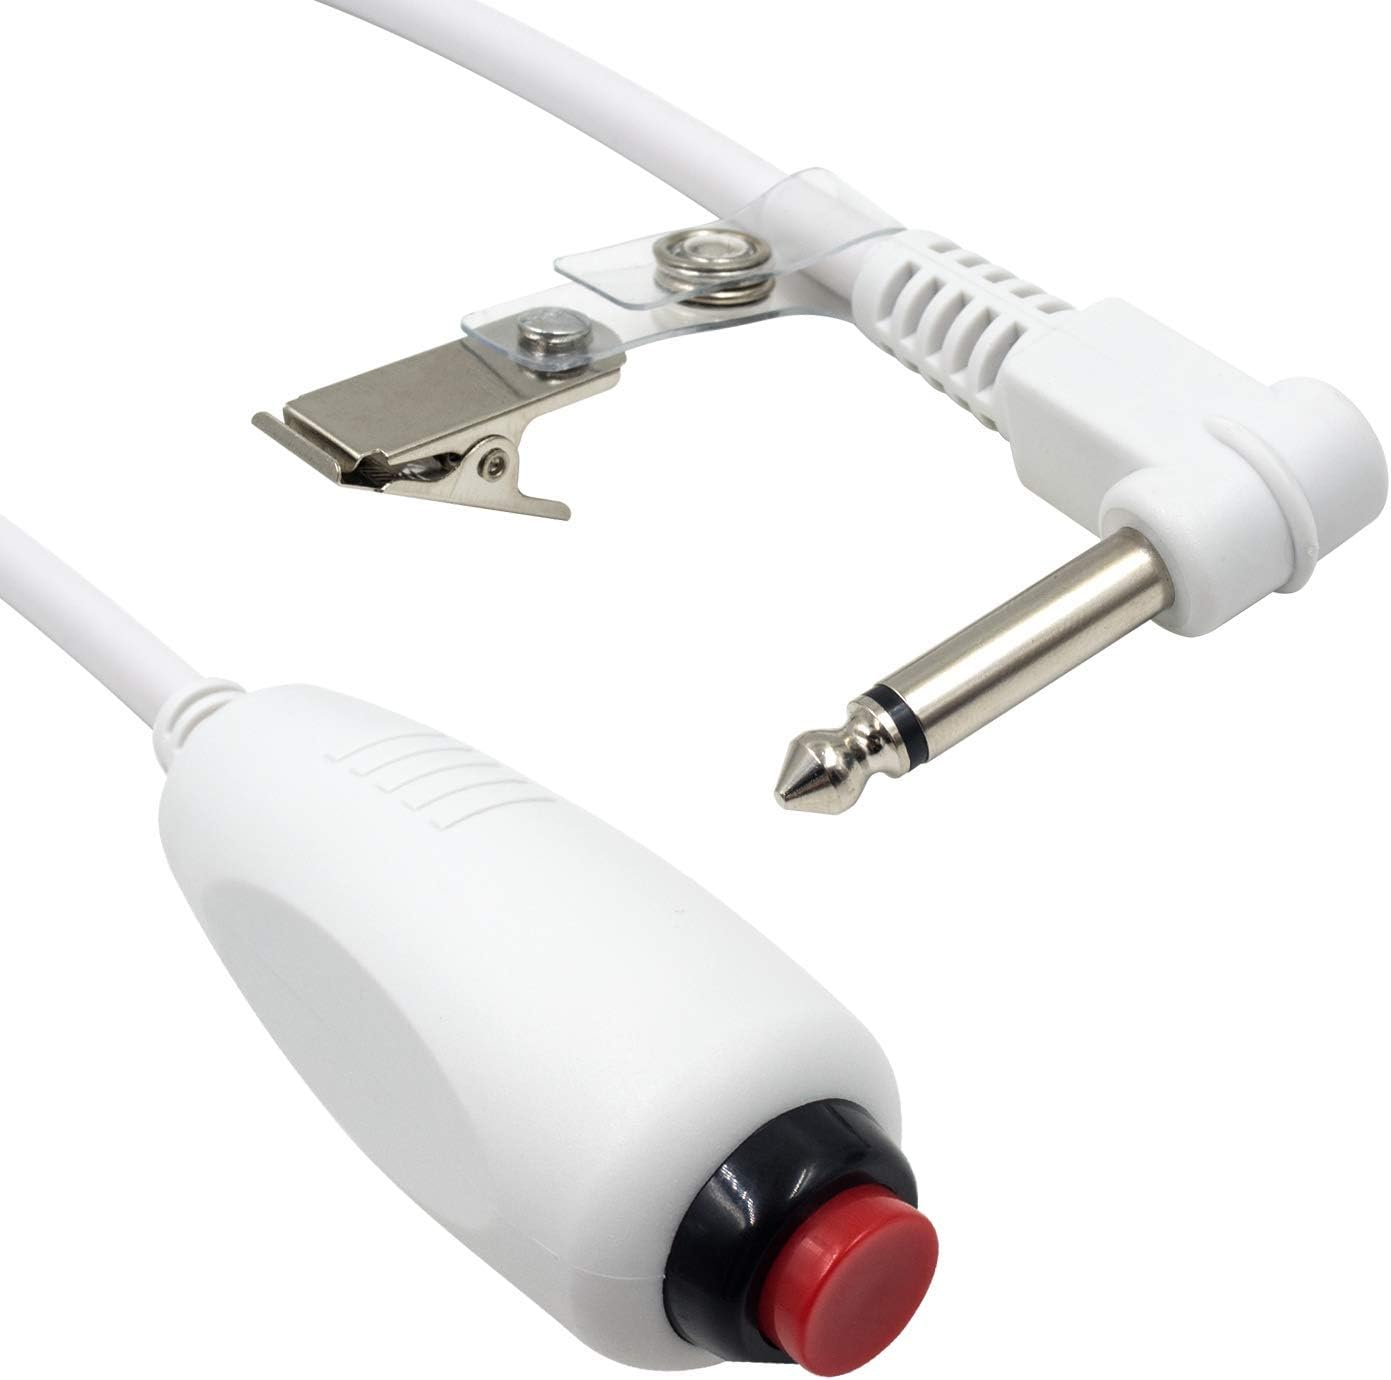 6.35mm 1/4" Phone Plug Cable with Bed Sheet Clip for Nurse Station 3m